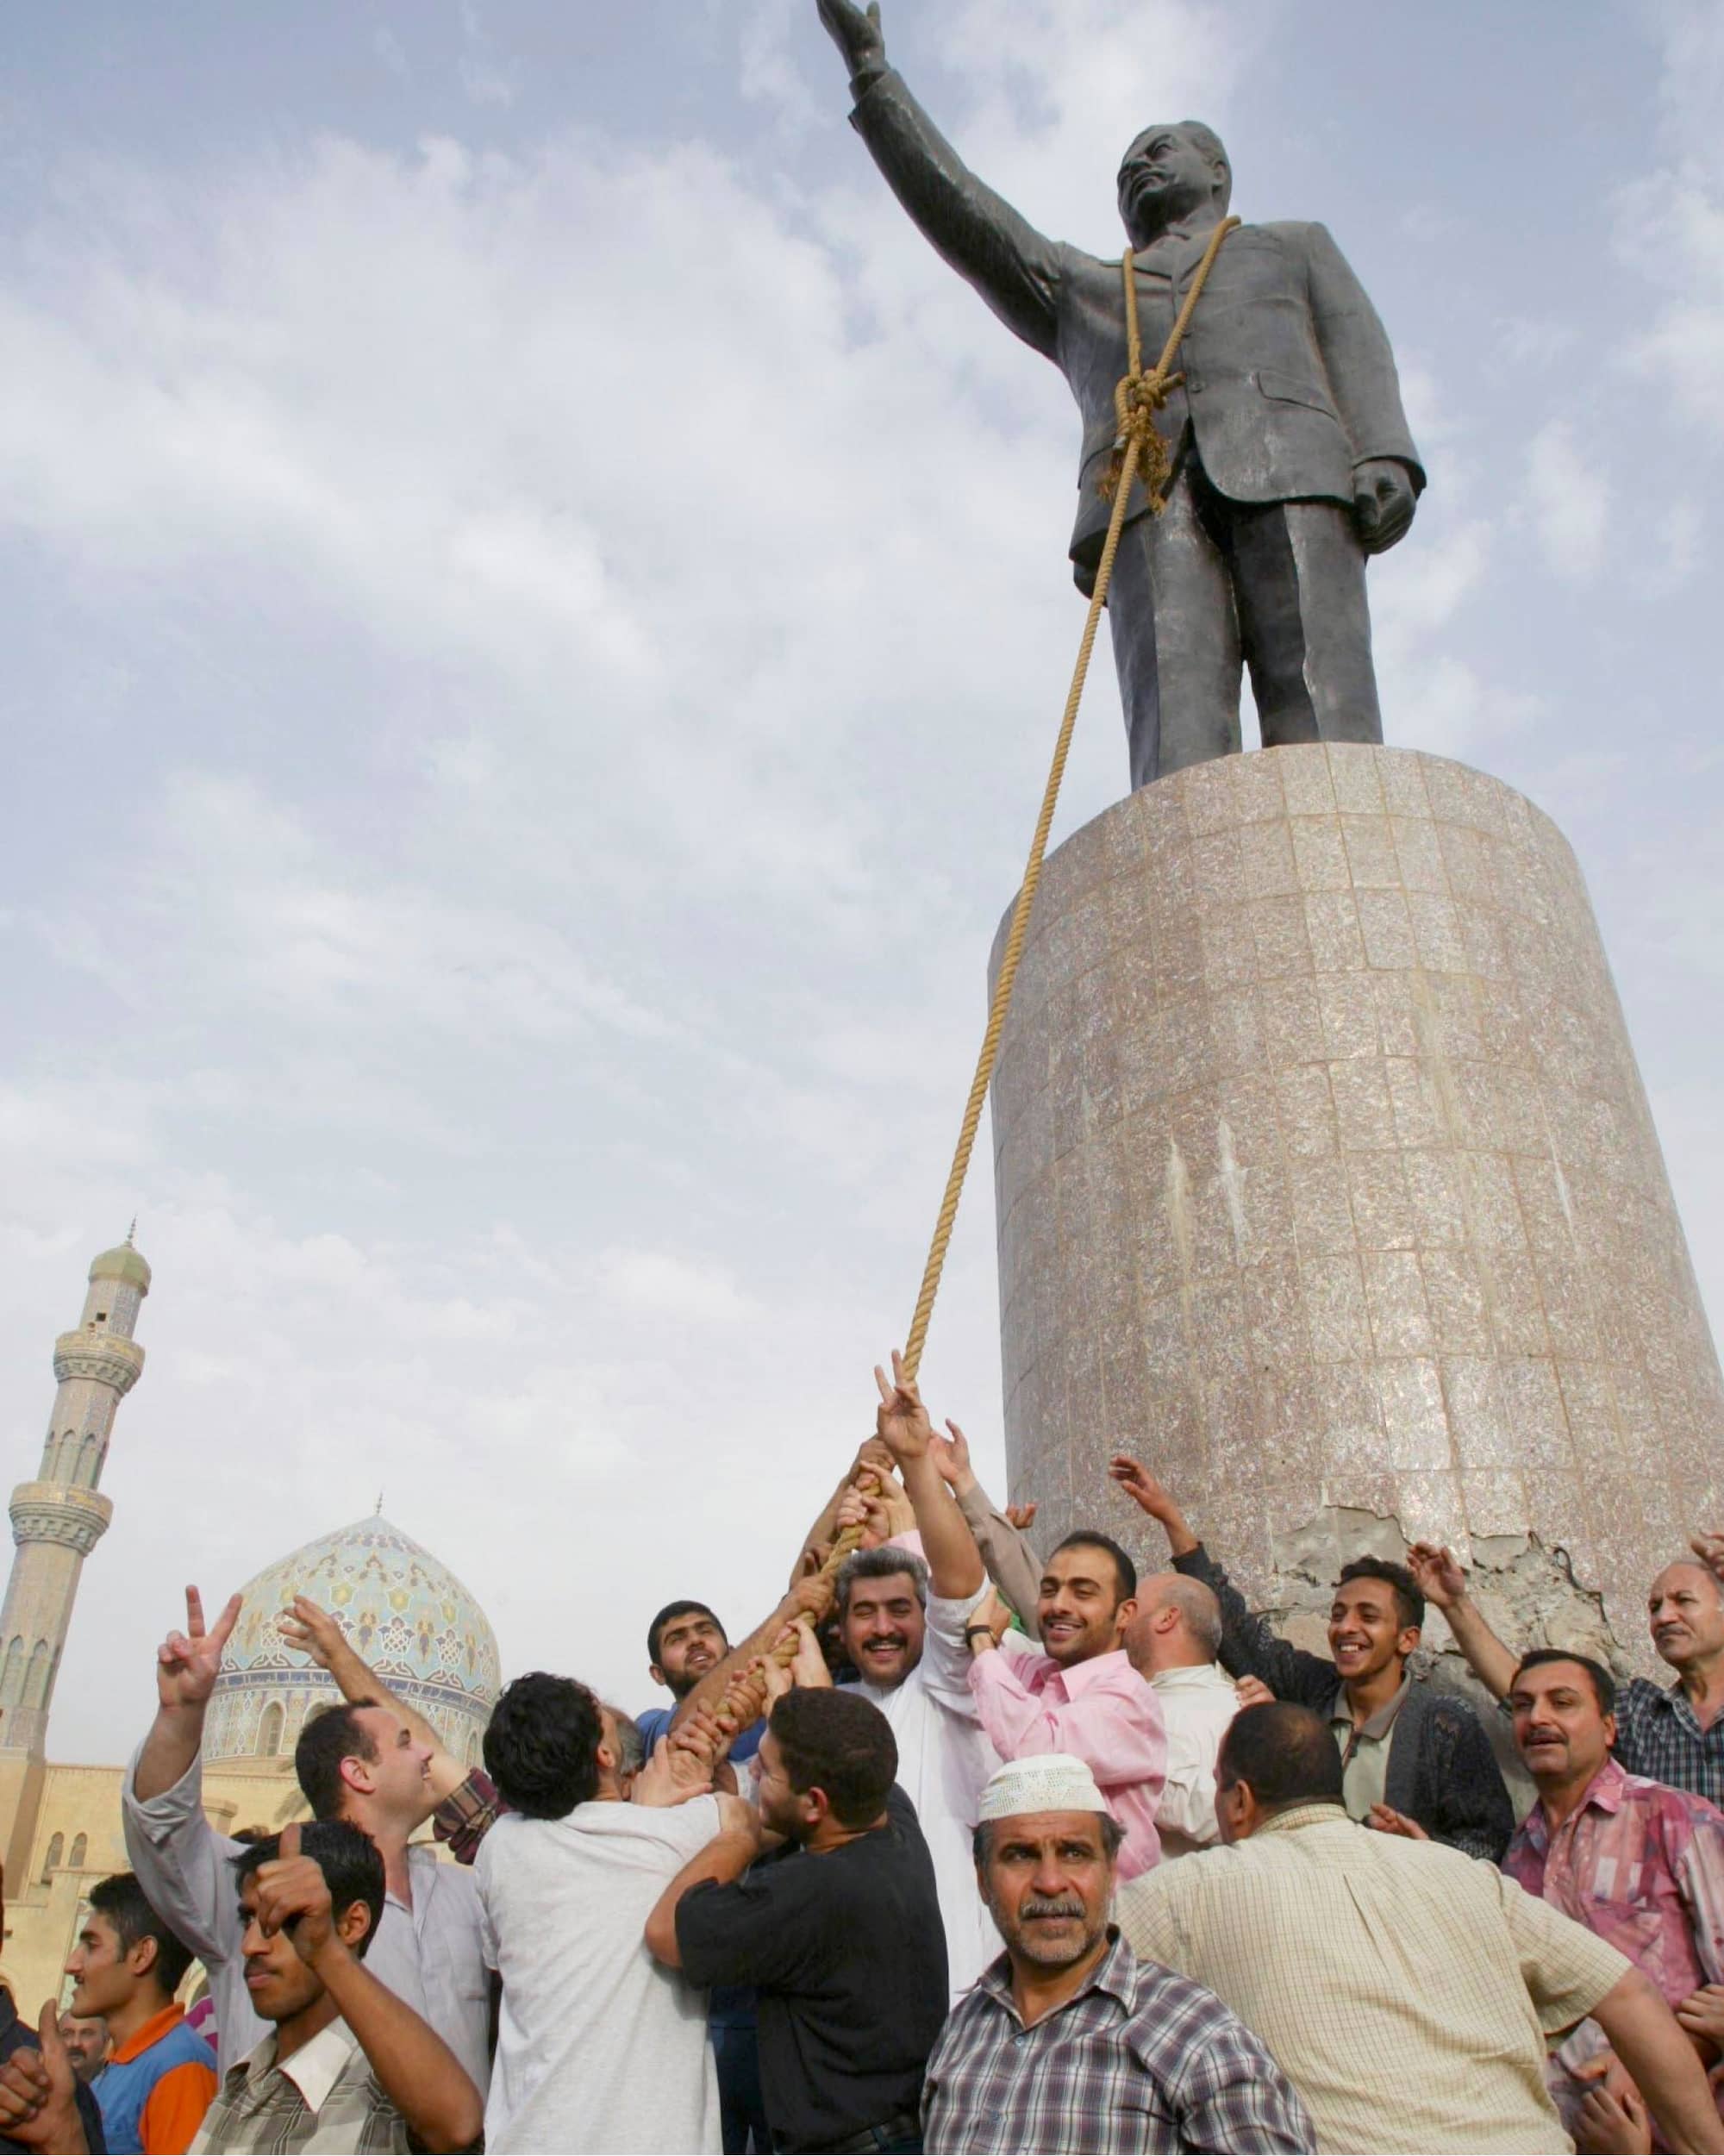 Pulling down a statue of Saddam Hussein